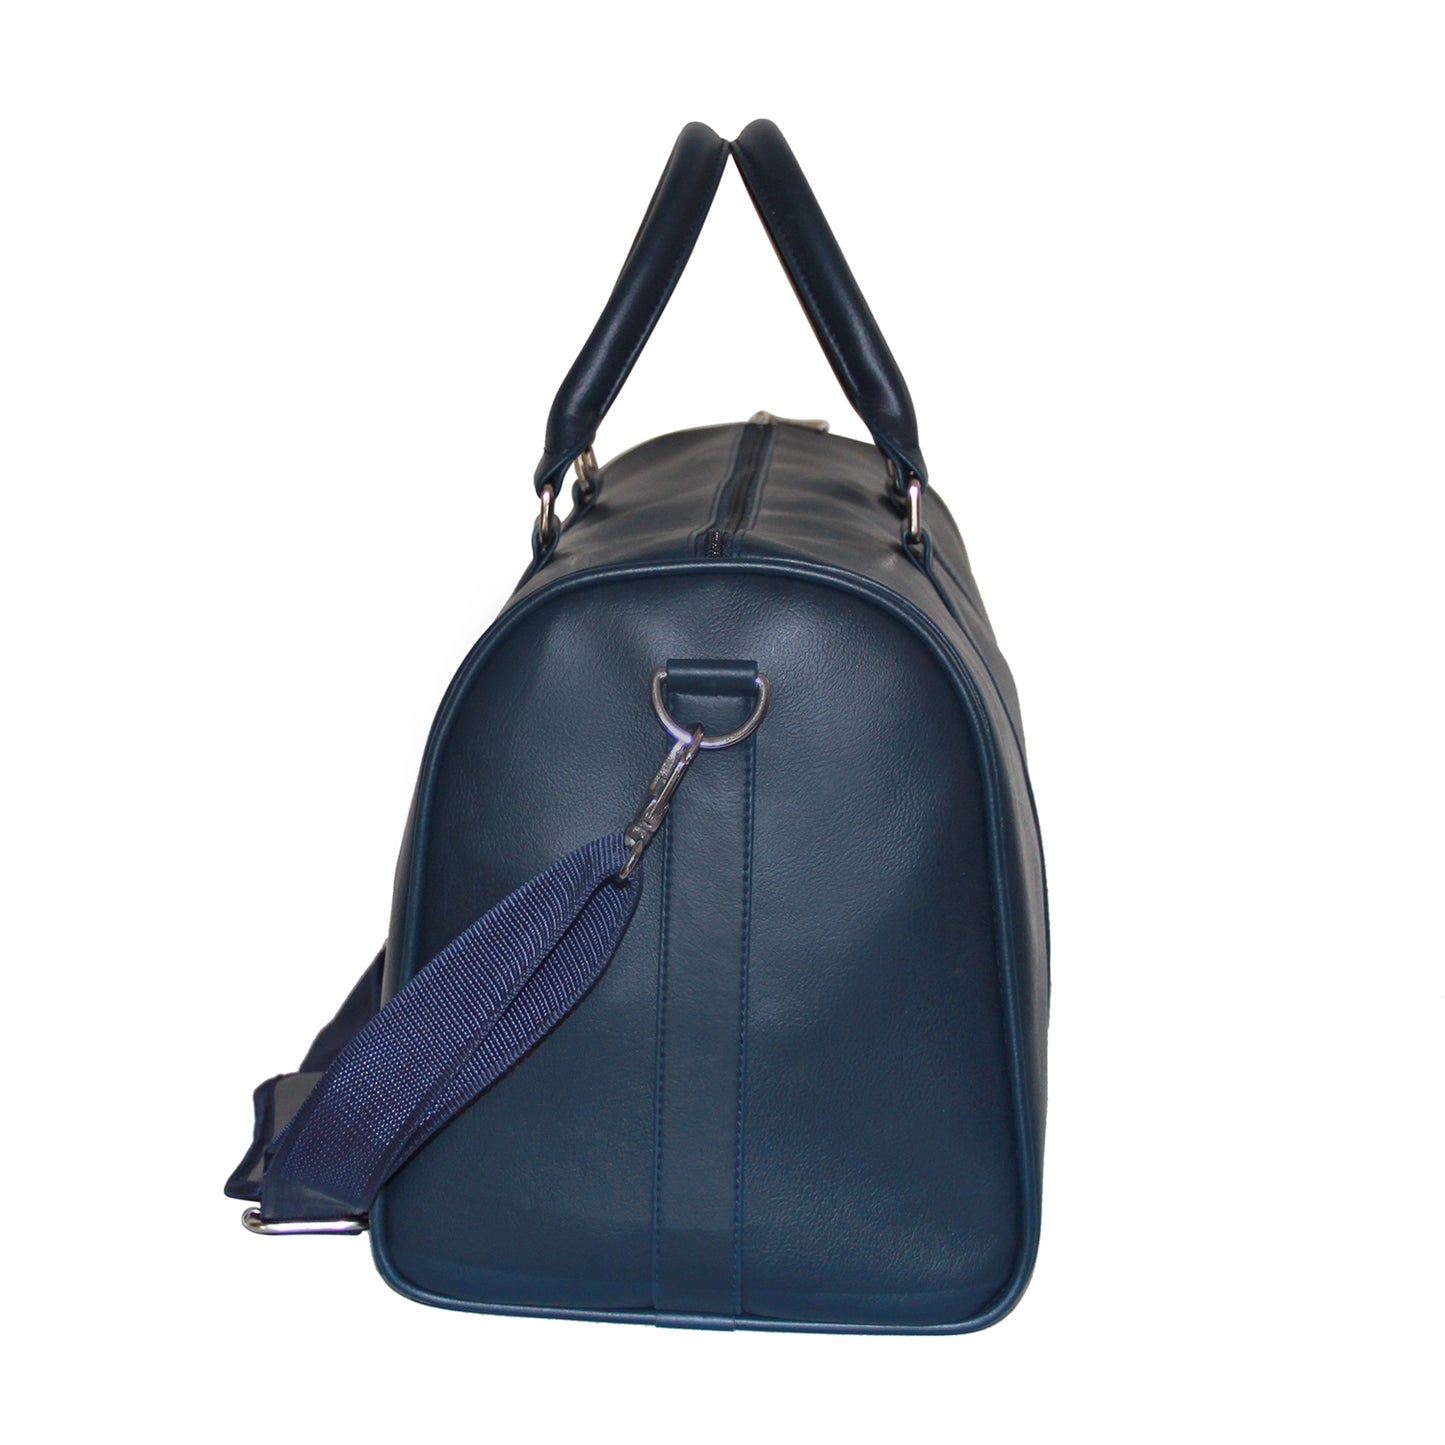 Navy Blue Faux Leather Weekender